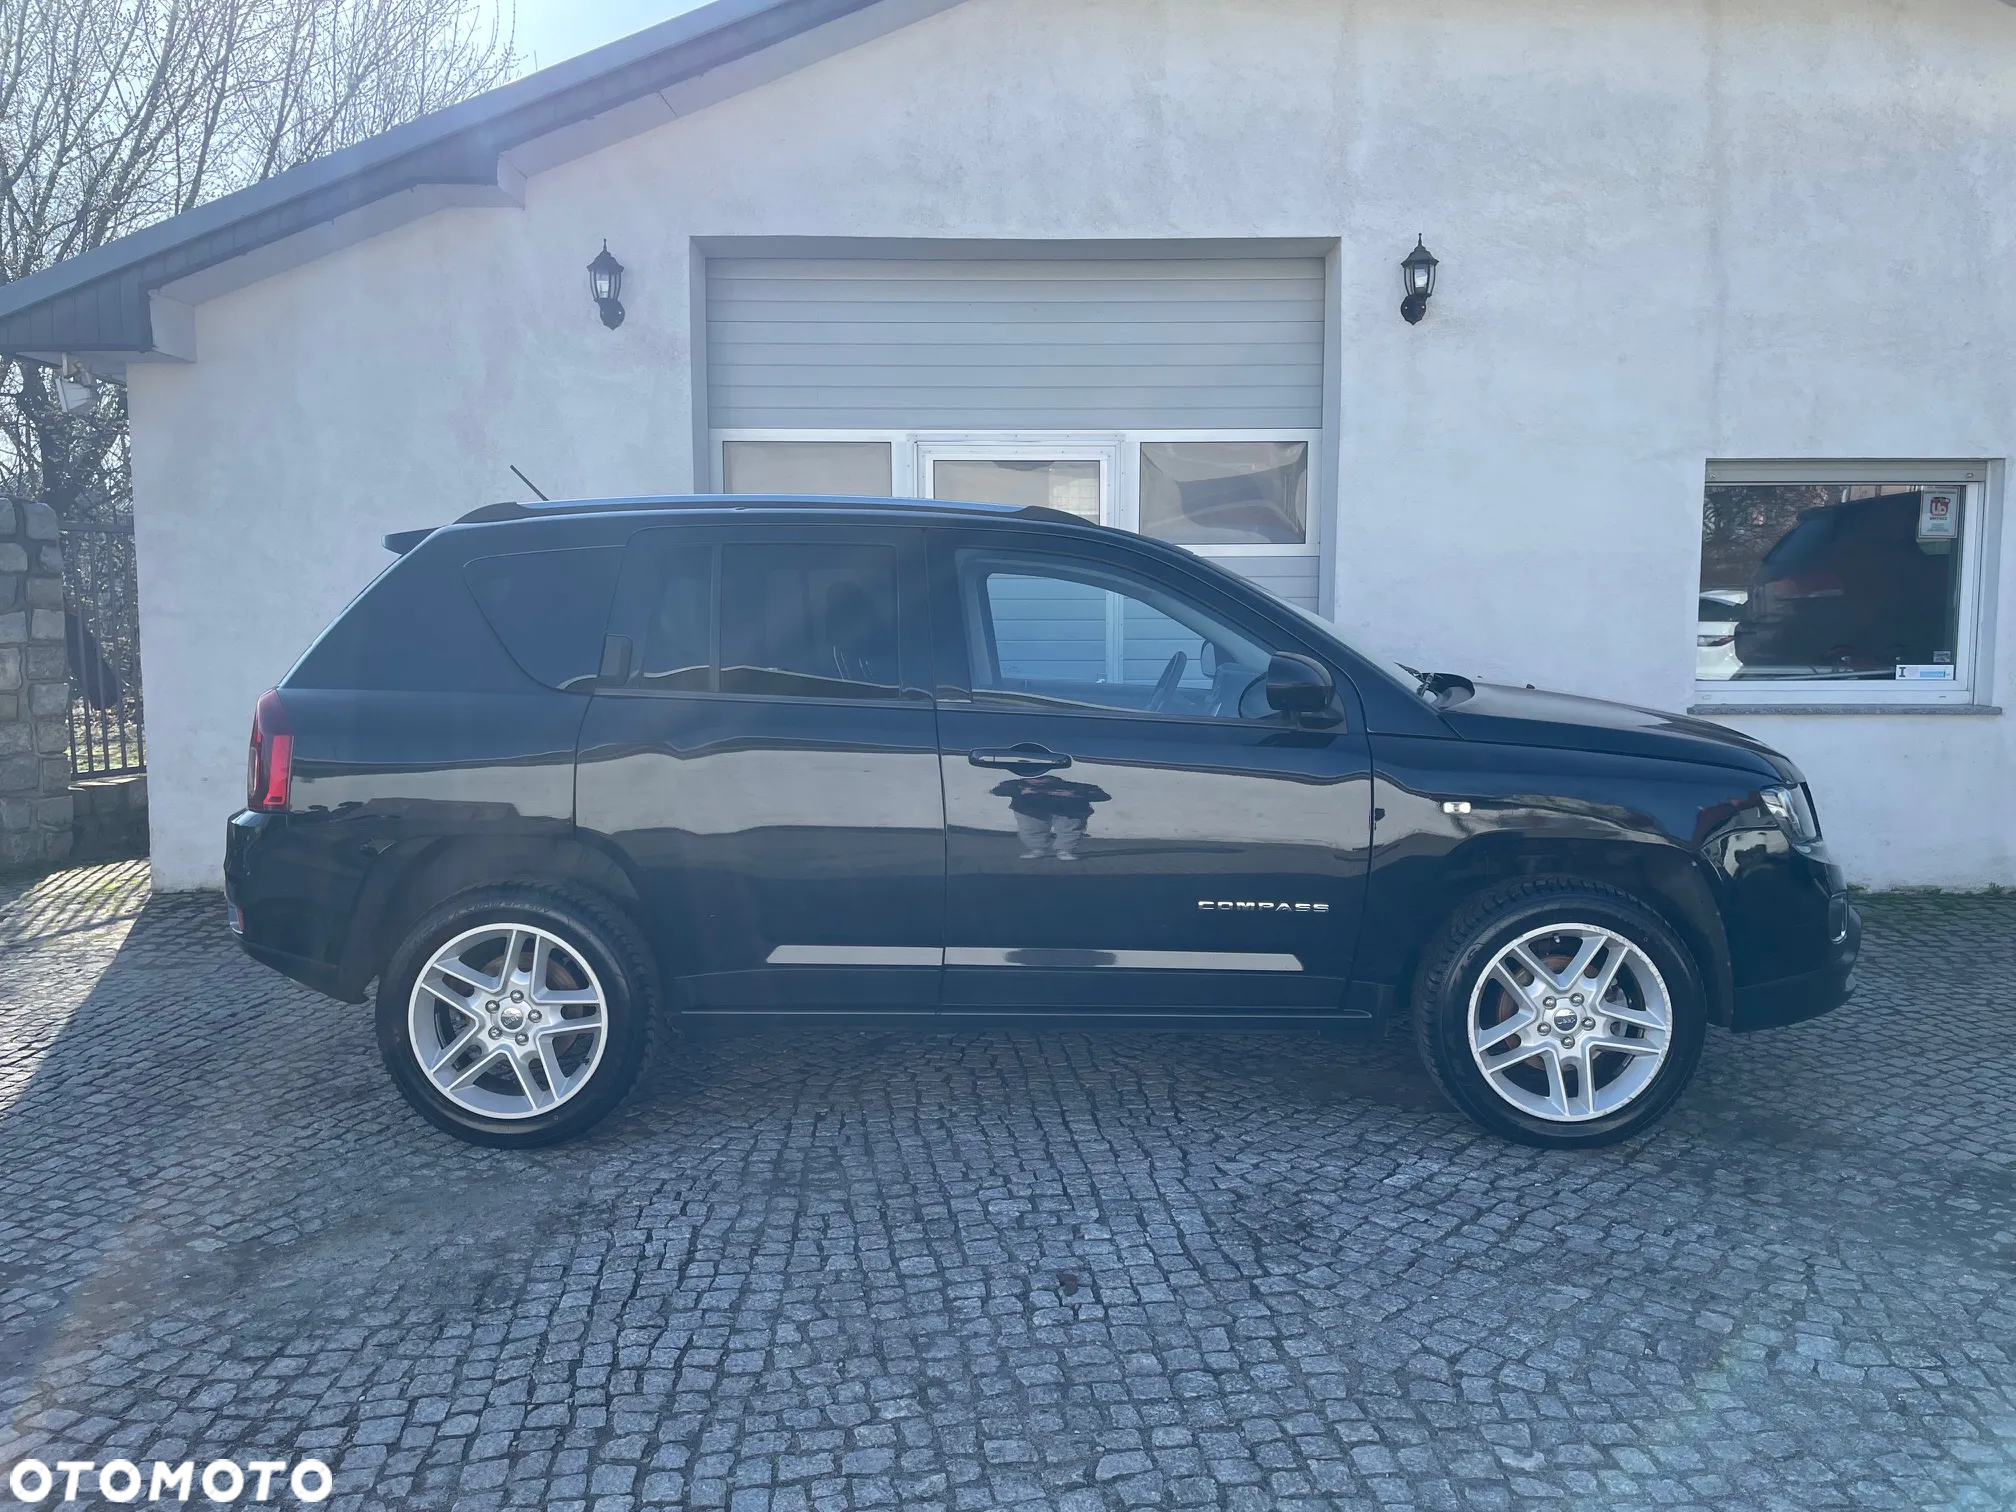 Jeep Compass 2.2 CRD 4x4 Limited - 5